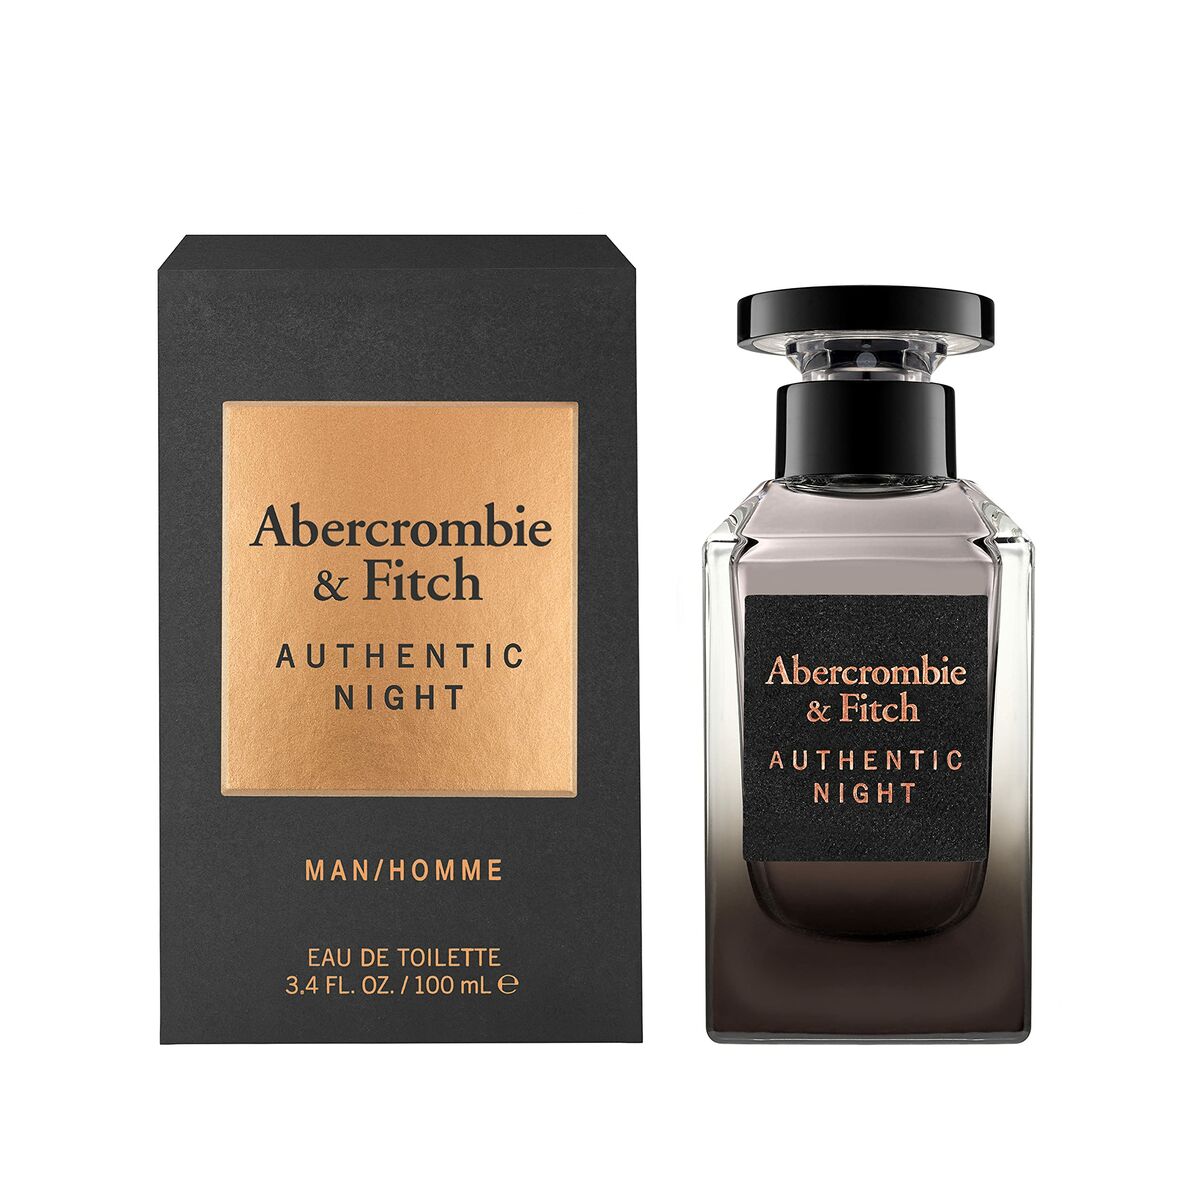 Parfum Homme EDT Abercrombie & Fitch 100 ml Authentic Night Man